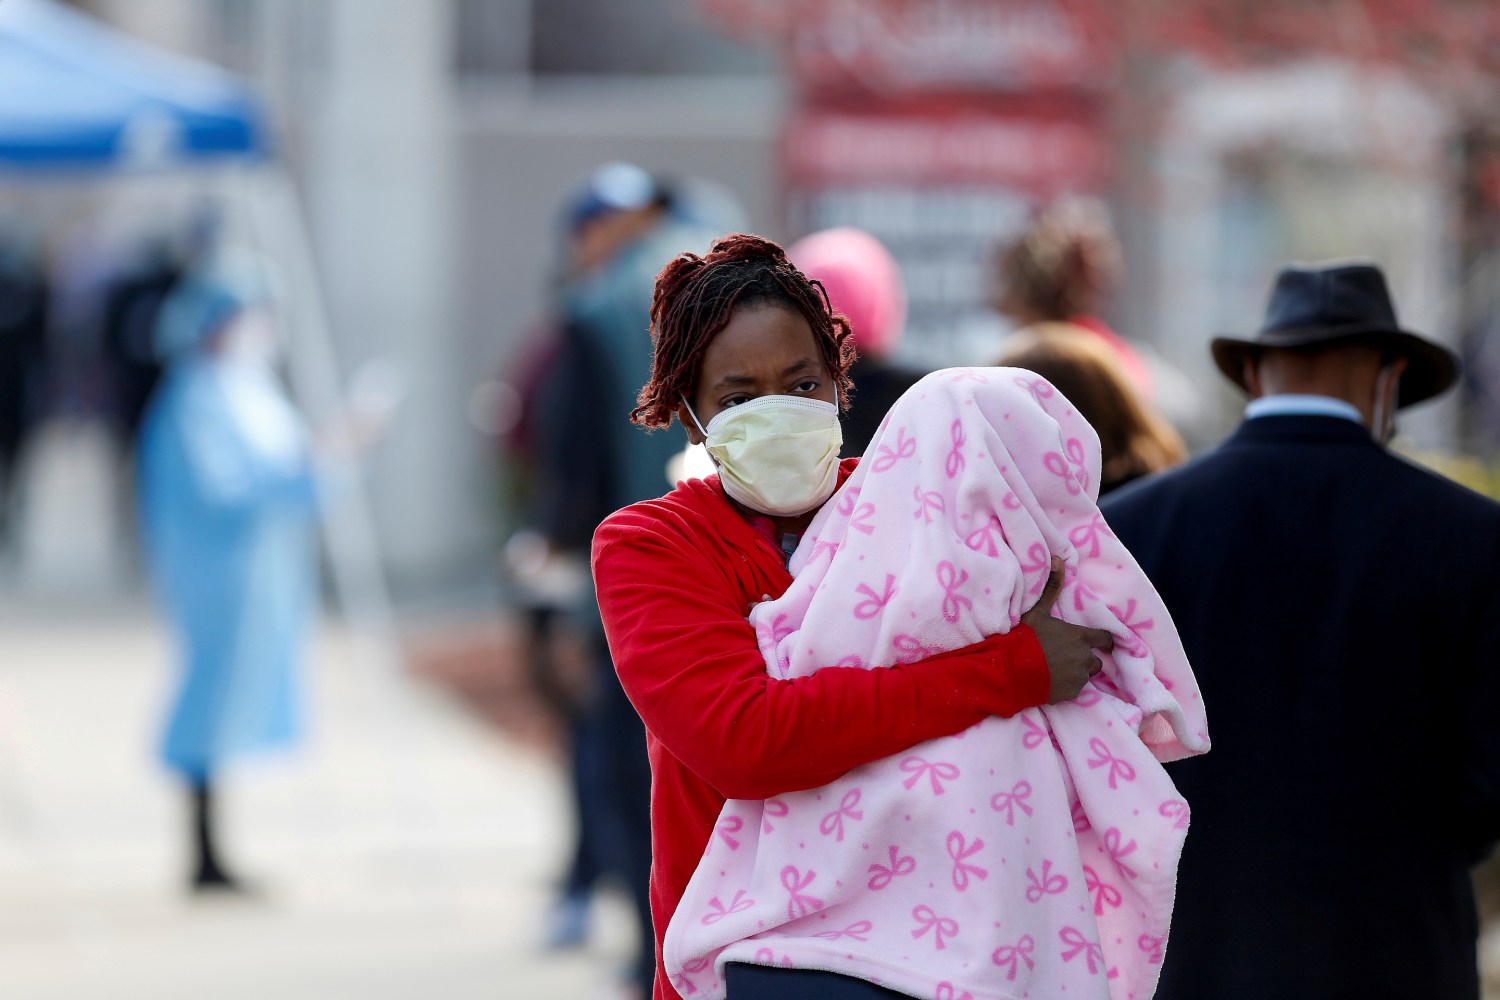 A woman holds a child as she walks past people waiting in line to receive testing during the global outbreak of the coronavirus disease (COVID-19) outside Roseland Community Hospital in Chicago, Illinois, U.S., April 7, 2020. REUTERS/Joshua Lott     TPX IMAGES OF THE DAY